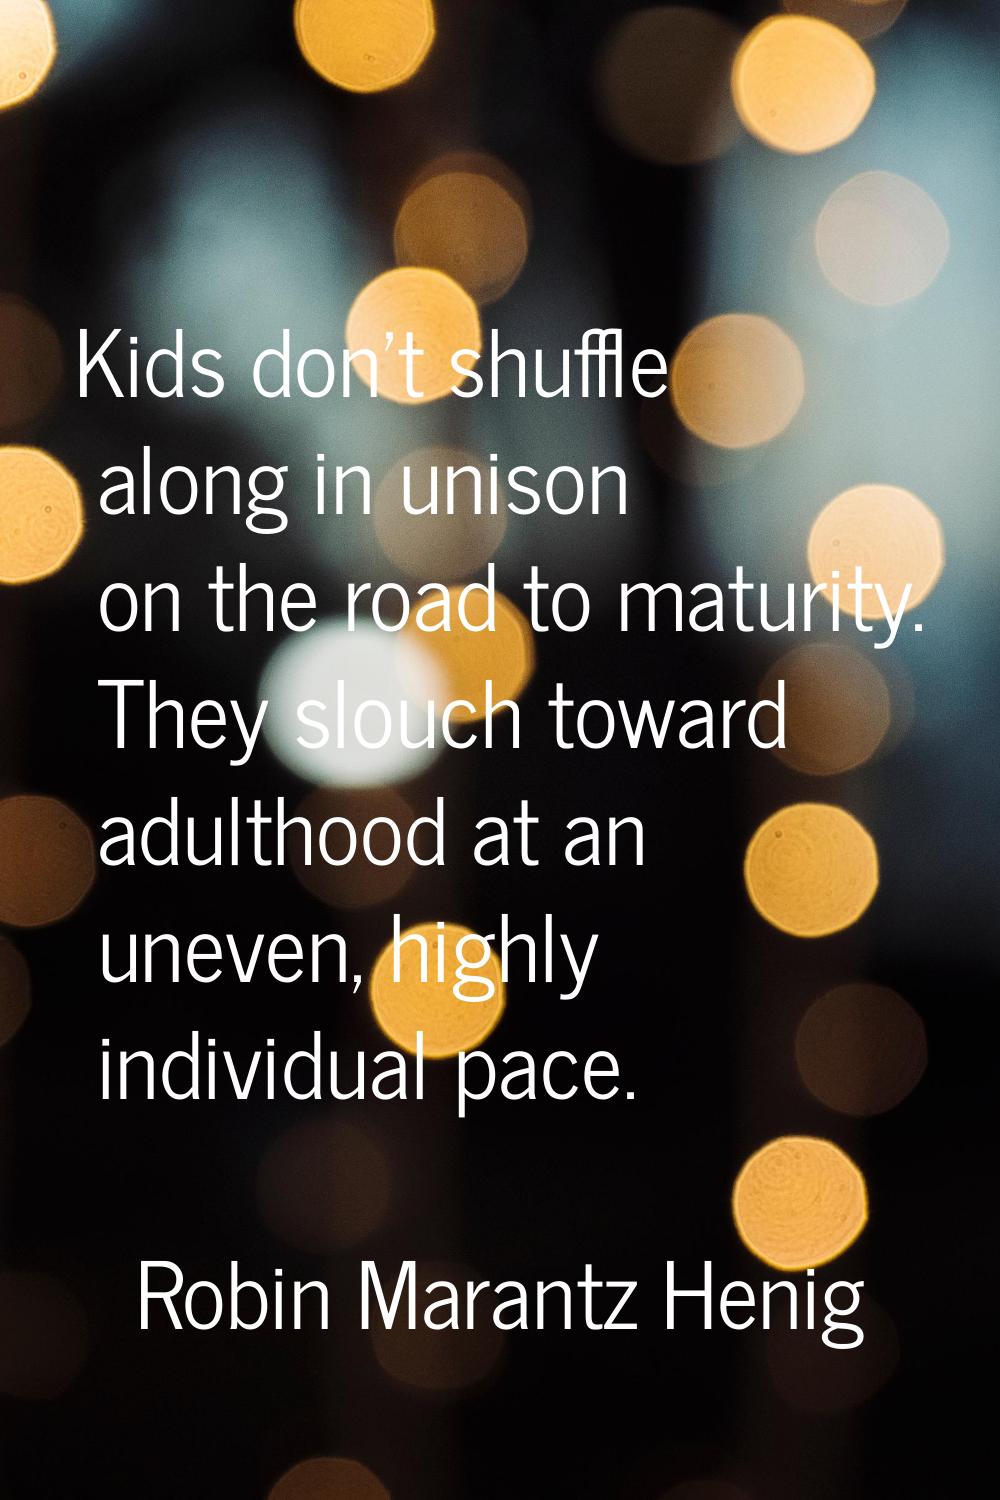 Kids don't shuffle along in unison on the road to maturity. They slouch toward adulthood at an unev